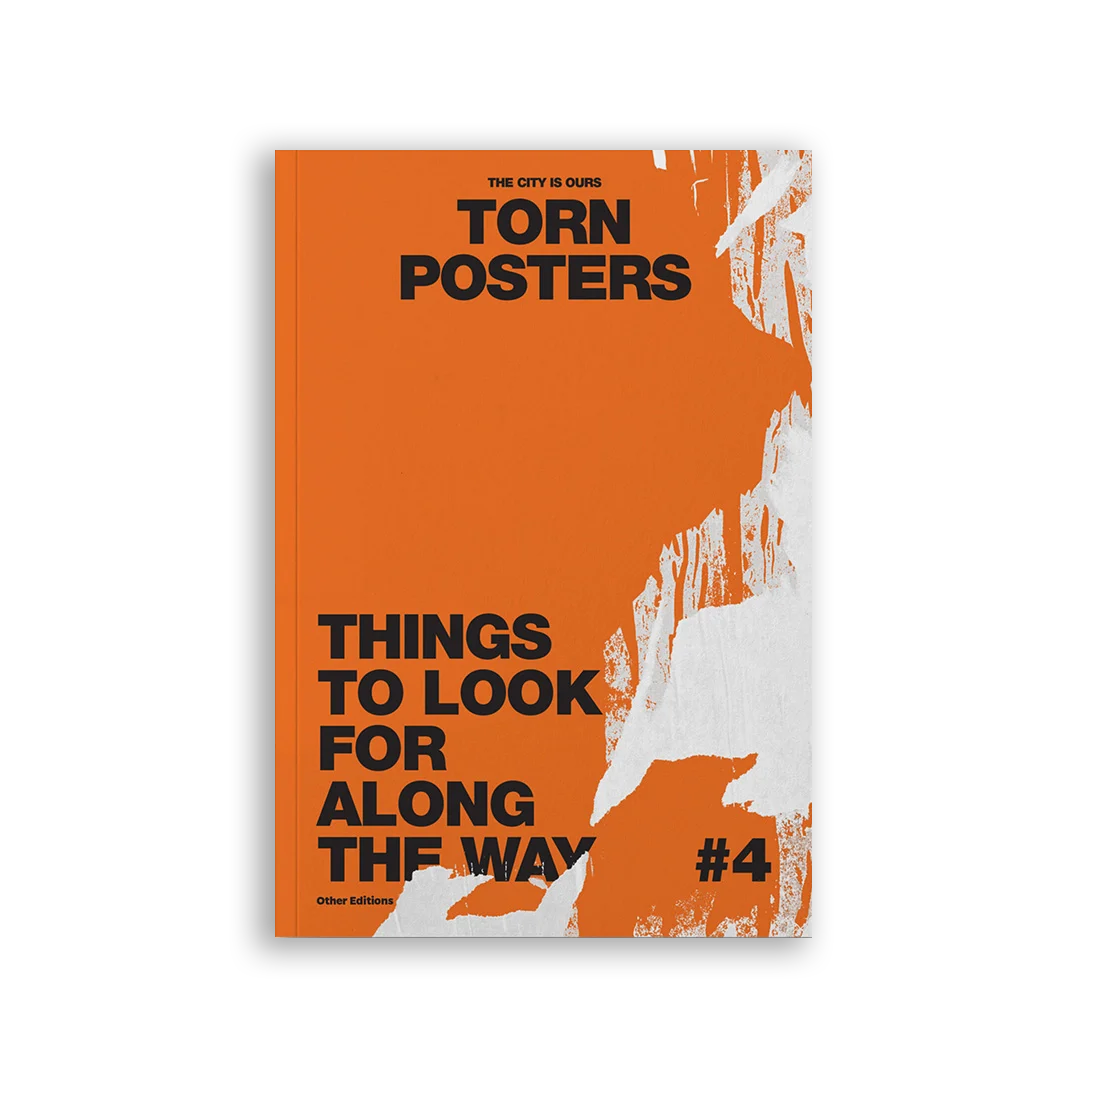 The City Is Ours #4: Torn Posters